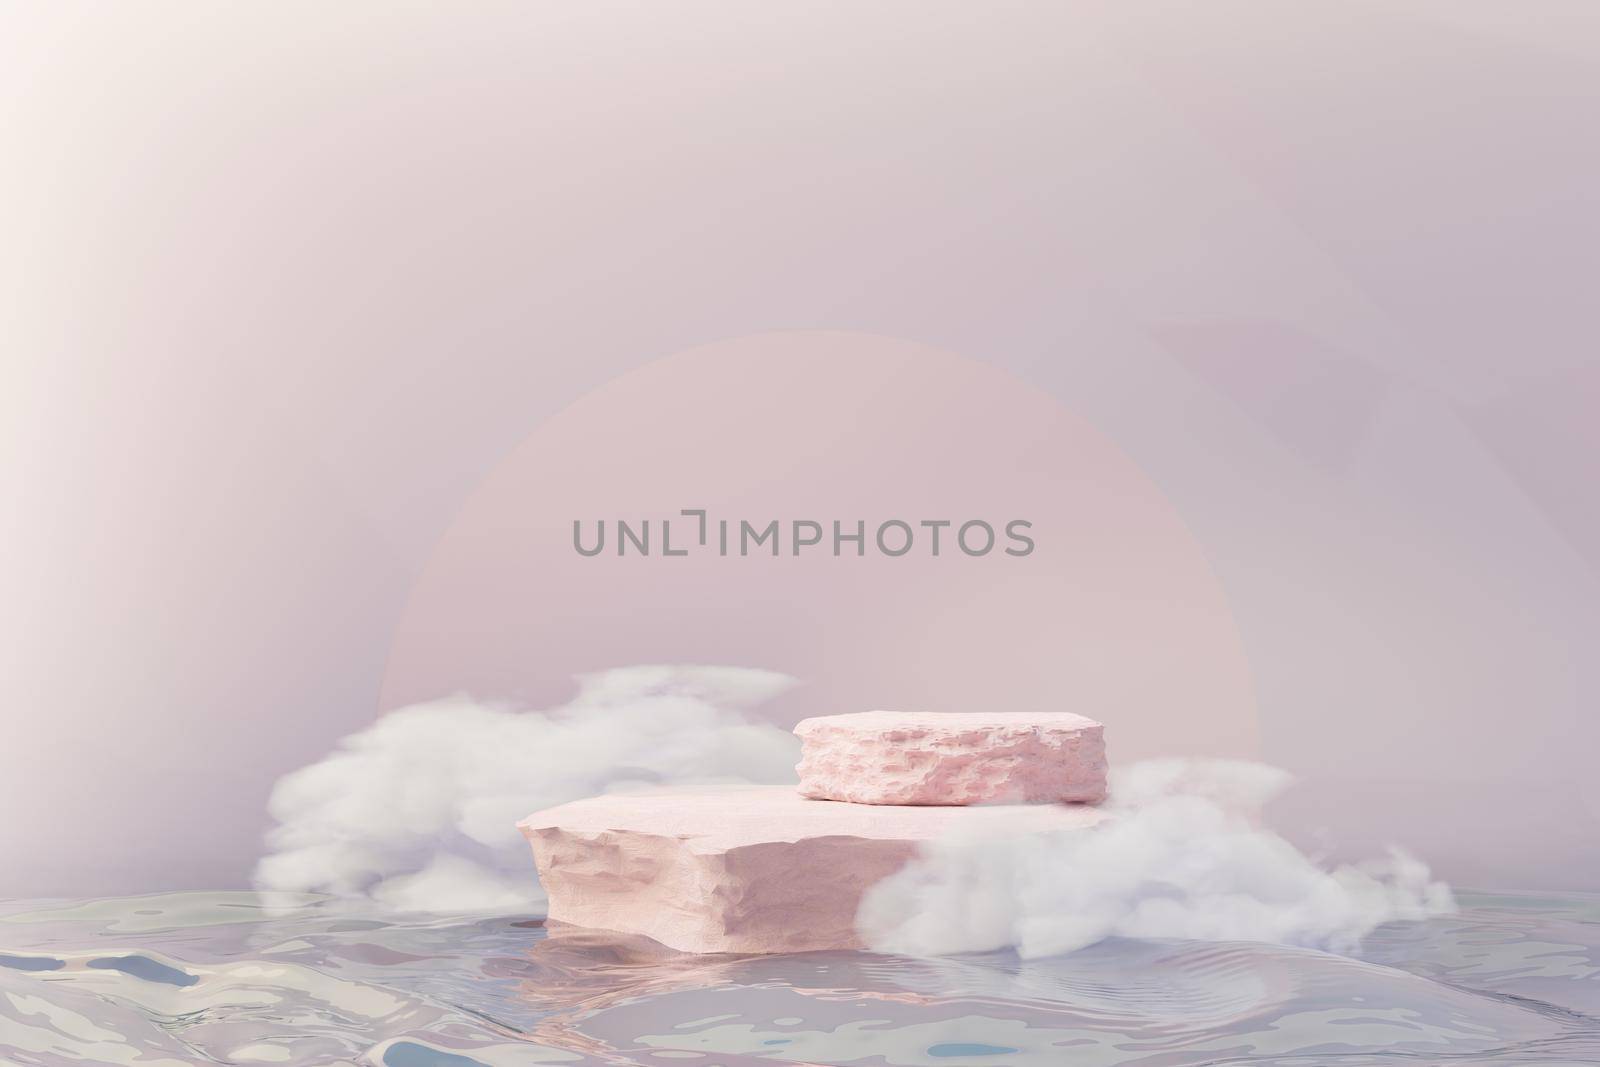 3d Beauty premium pedestal product display with Dreaming land and fluffy cloud. Minimal pastel sky and clouds scene for present product promotion and beauty cosmetics. Romance land of Dreams concept.